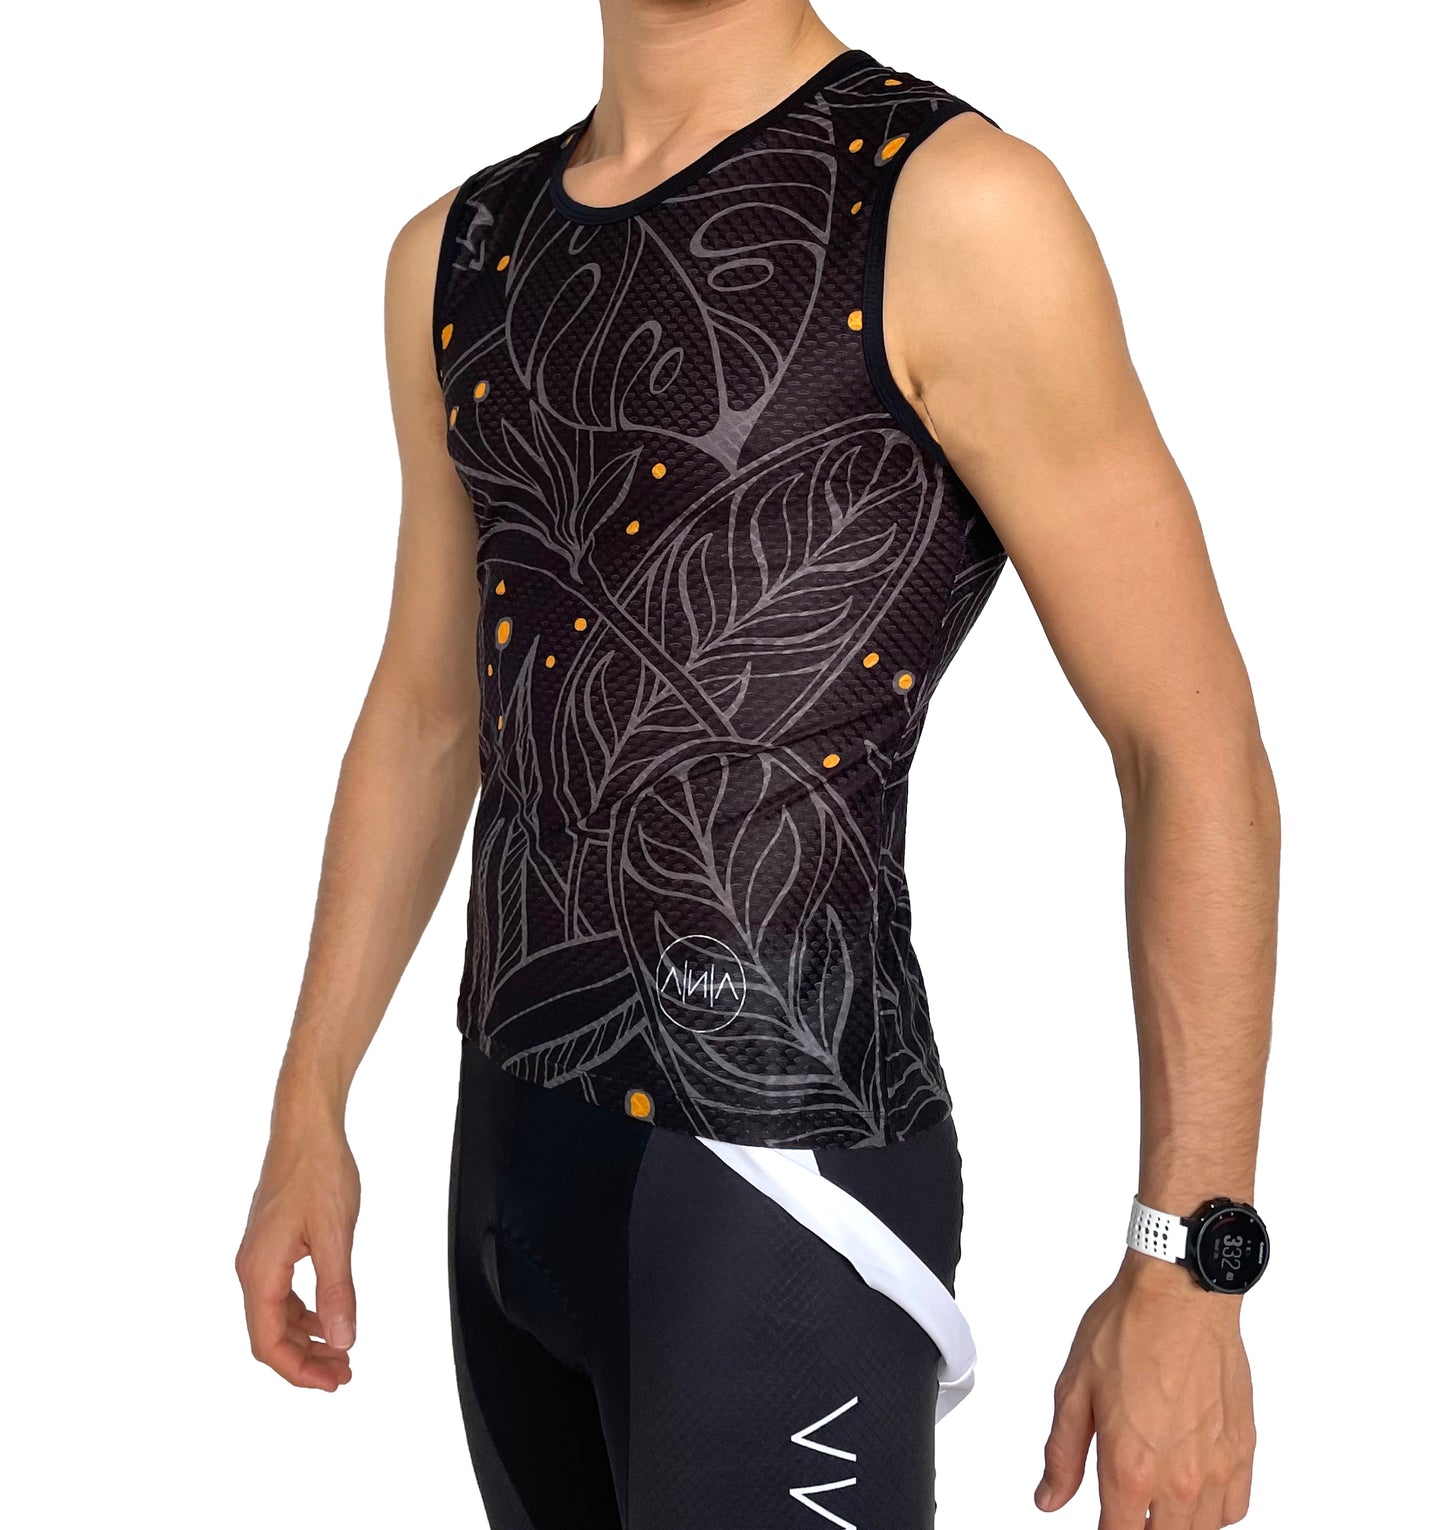 OHANA Triathlon Cycling Base Layer in color black for cycling with OHANA Triathlon logo and print. Cycling Base Layer with the best quality for extra comfort during your ride. Breathable and quick drying, ultra light and thermo-regulating fabrics.